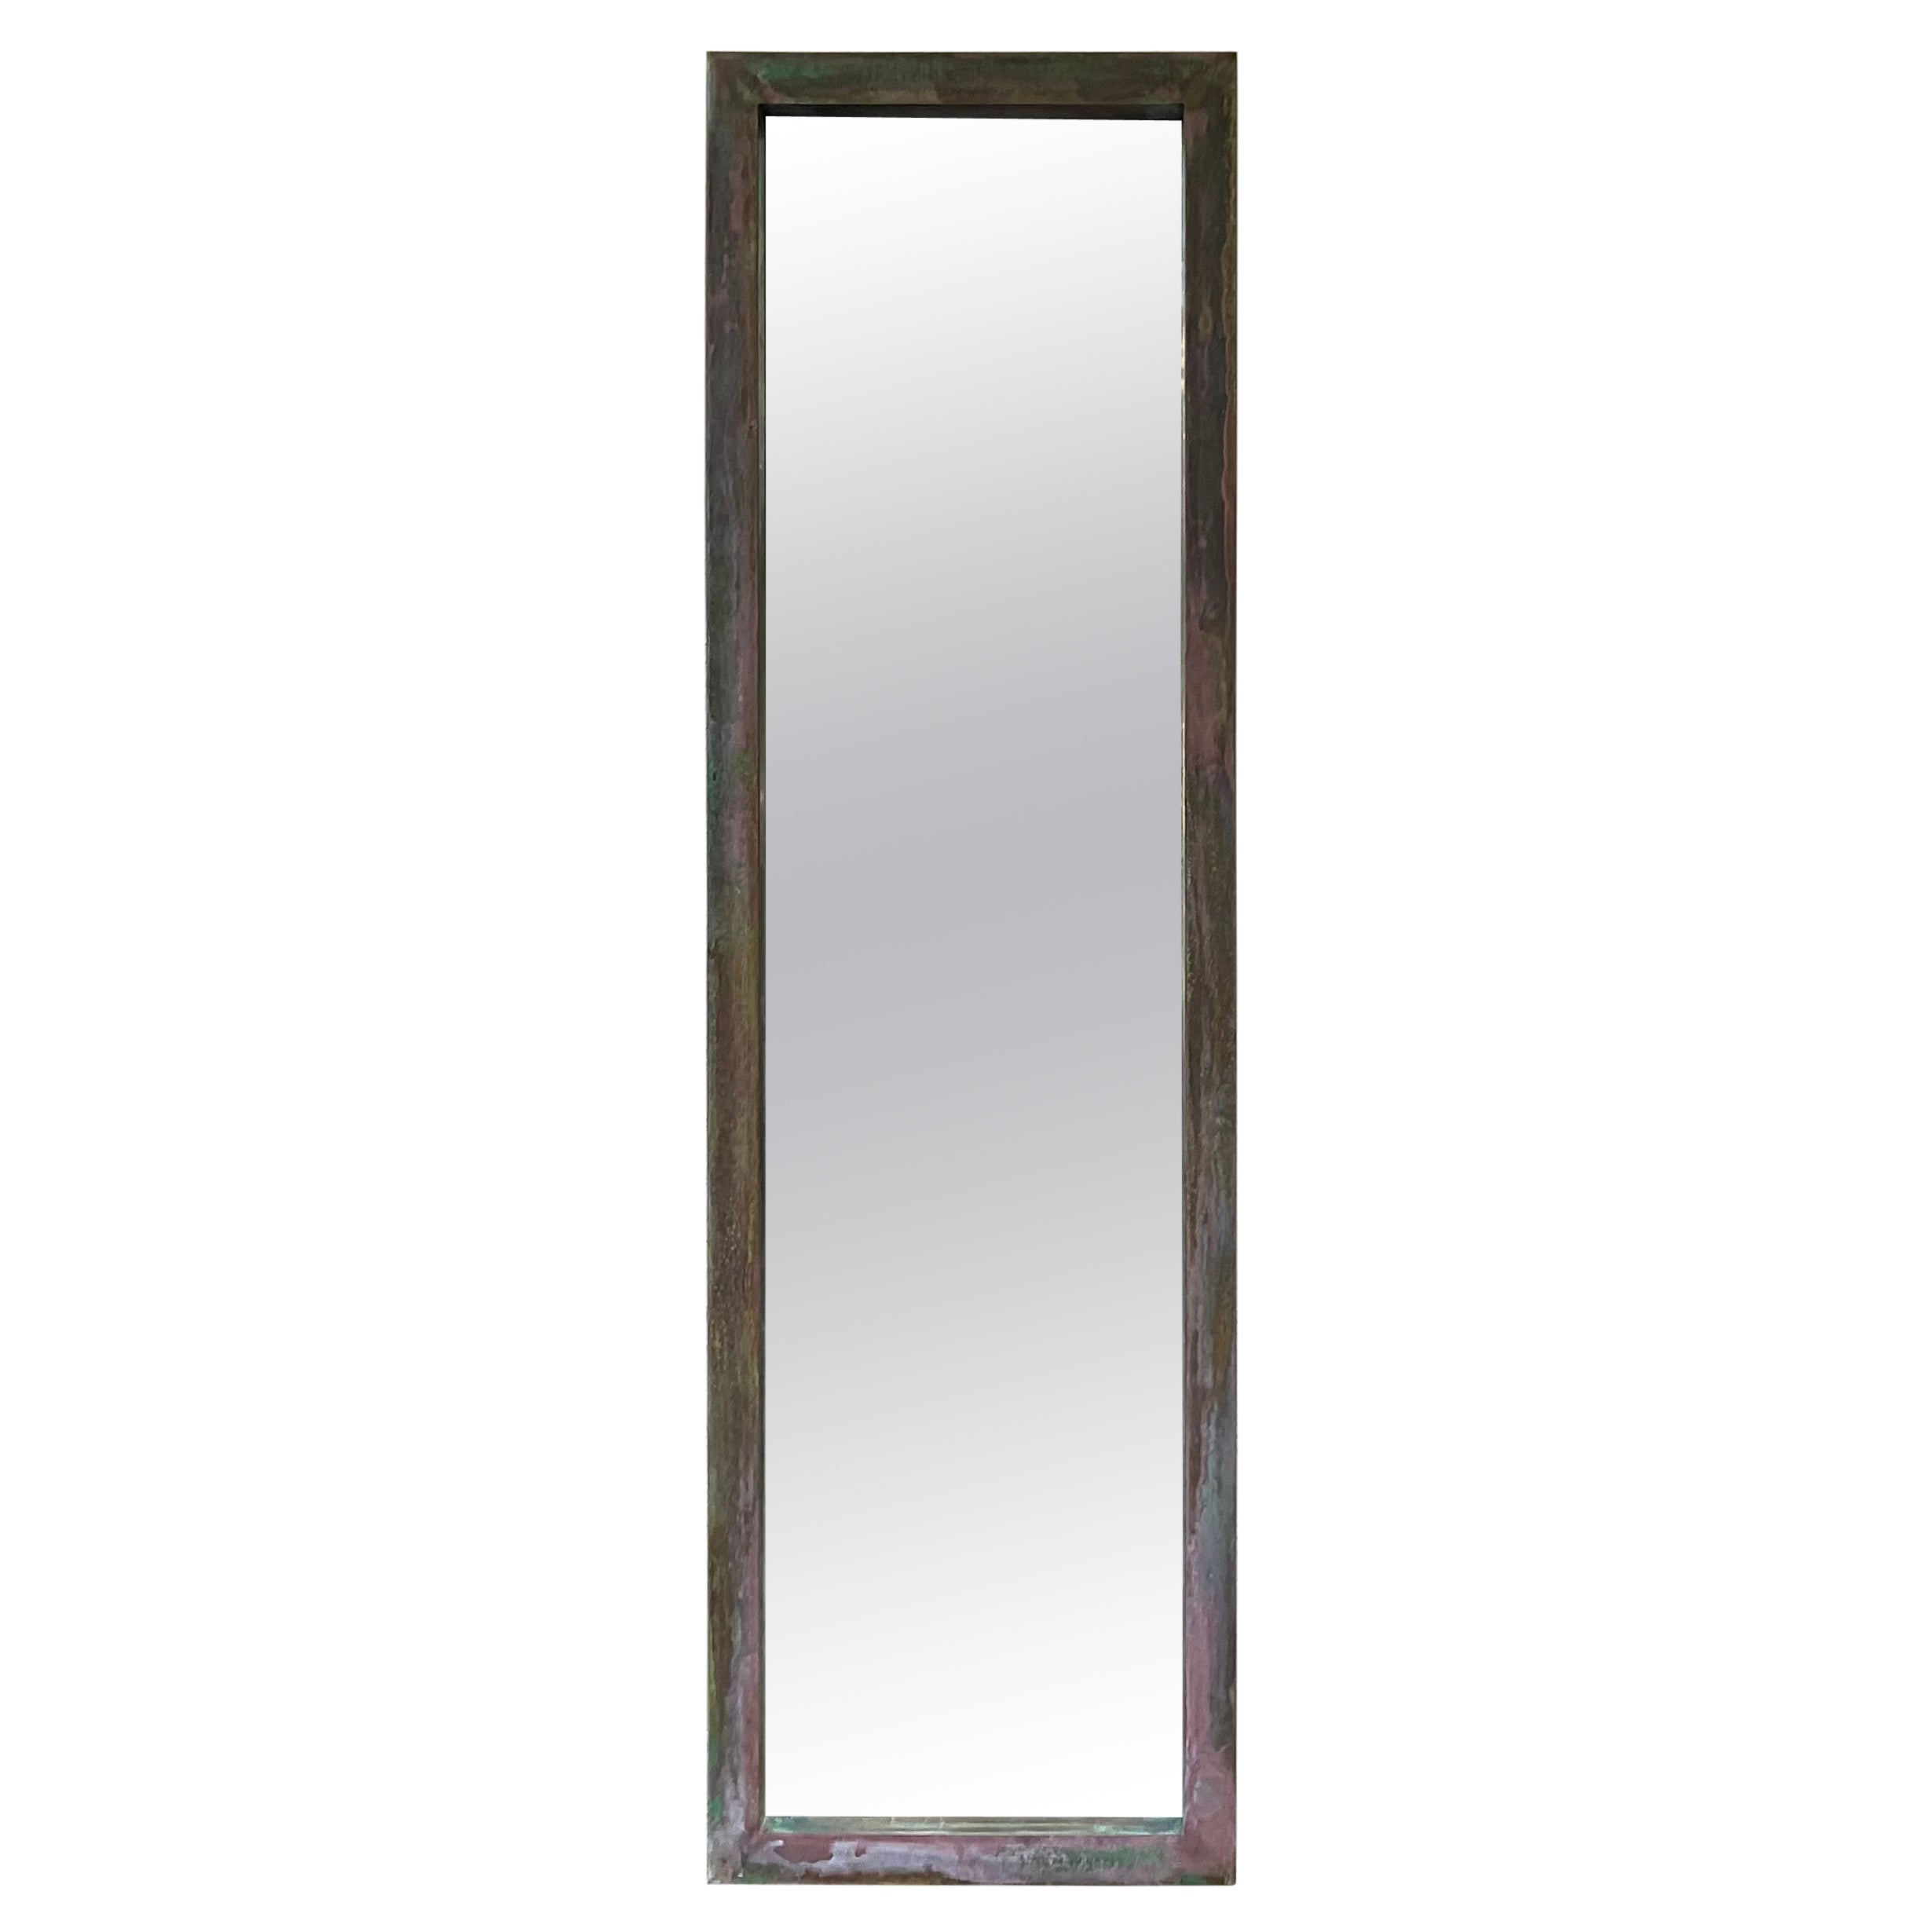 One of Kind Narrow Architectural Rectangular Brass Mirror For Sale